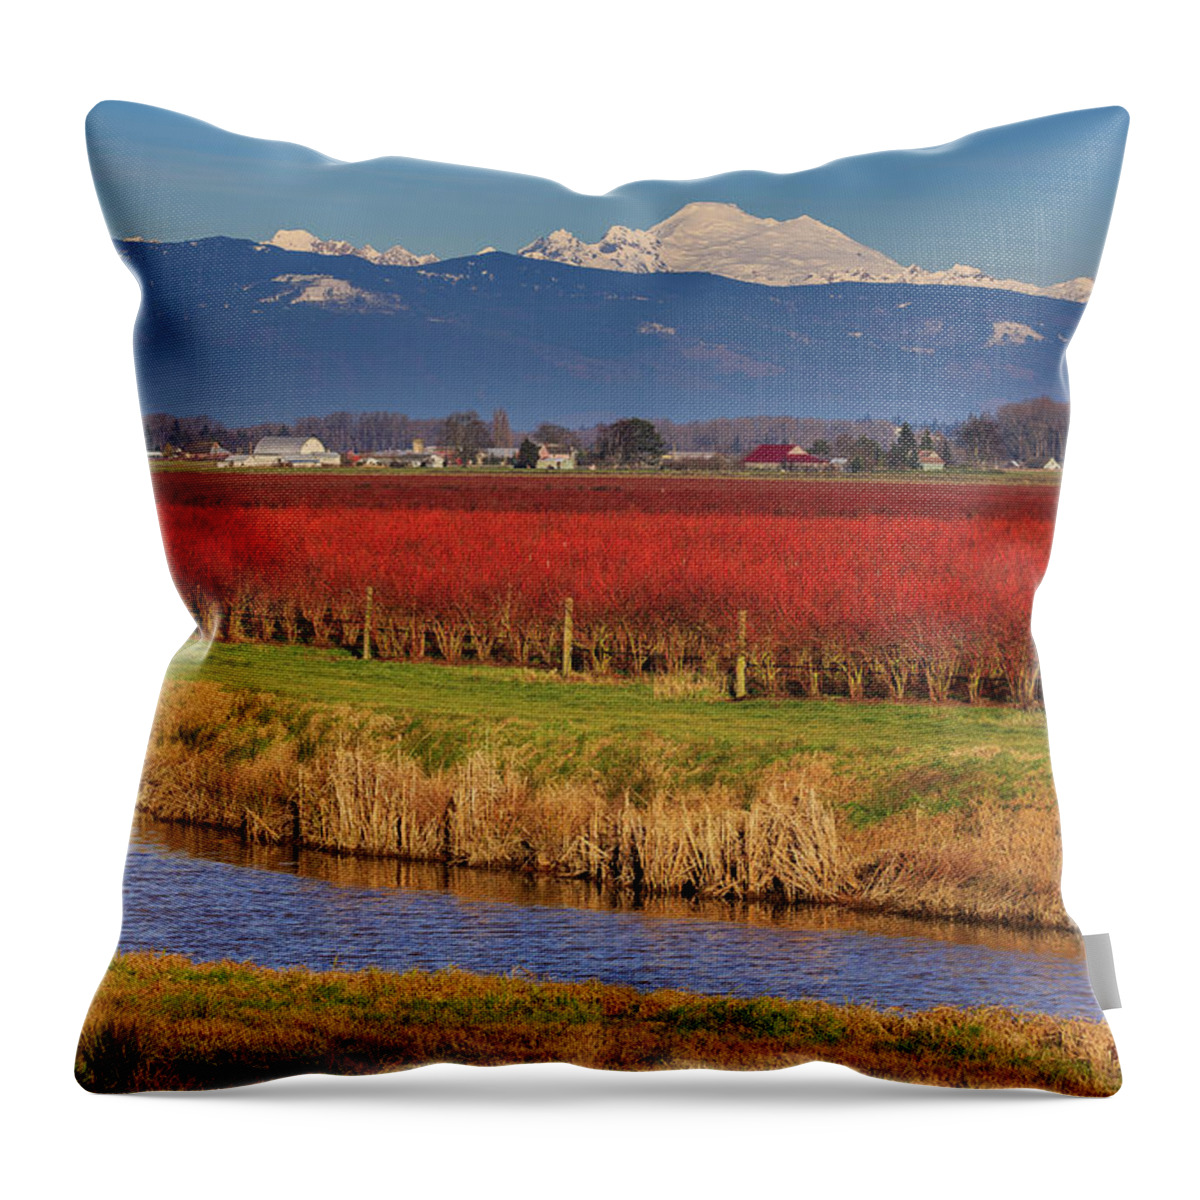 Landscape Throw Pillow featuring the photograph Layer Cake by Briand Sanderson